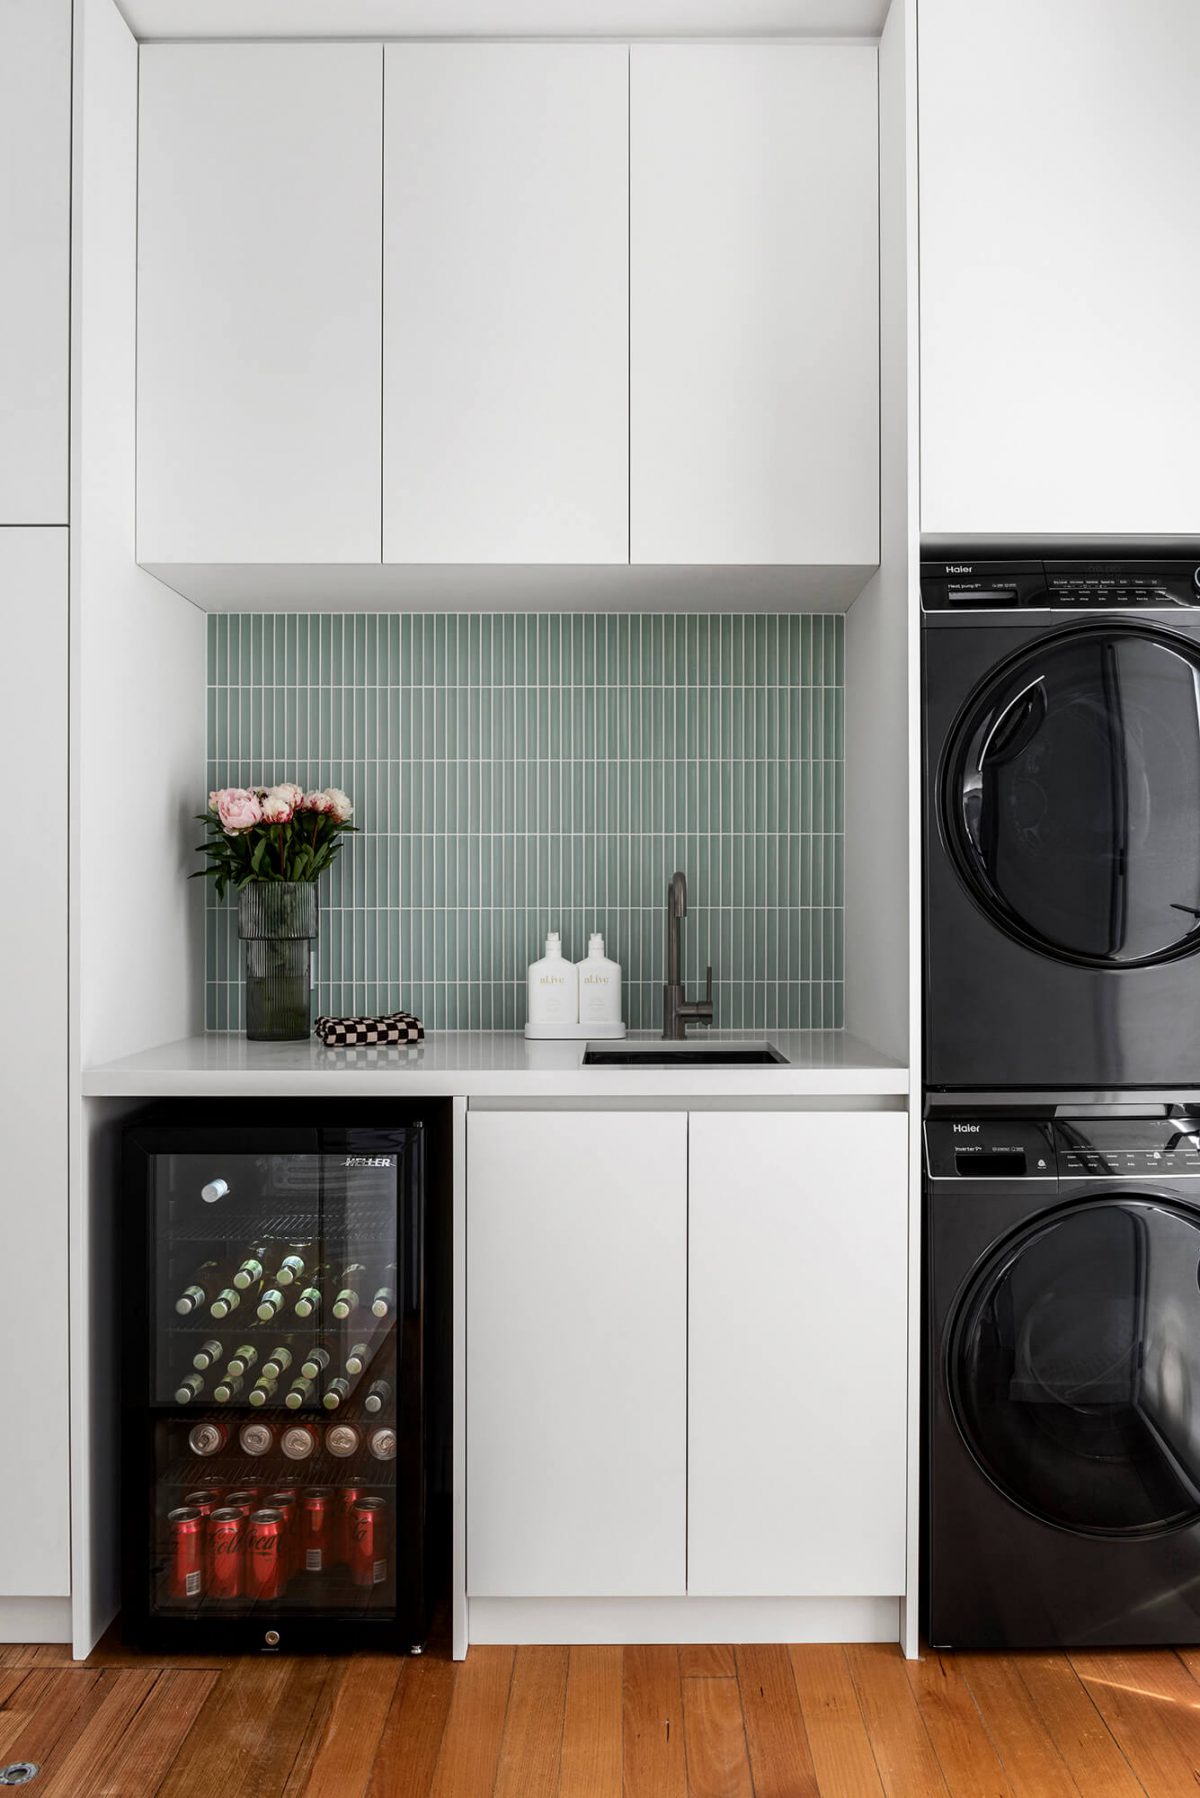 Brighton combined space kitchen renovation butlers pantry and laundry room green concave tiles, white custom joinery, brushed gunmetal tapware, black washing machine, black dryer, wine fridge